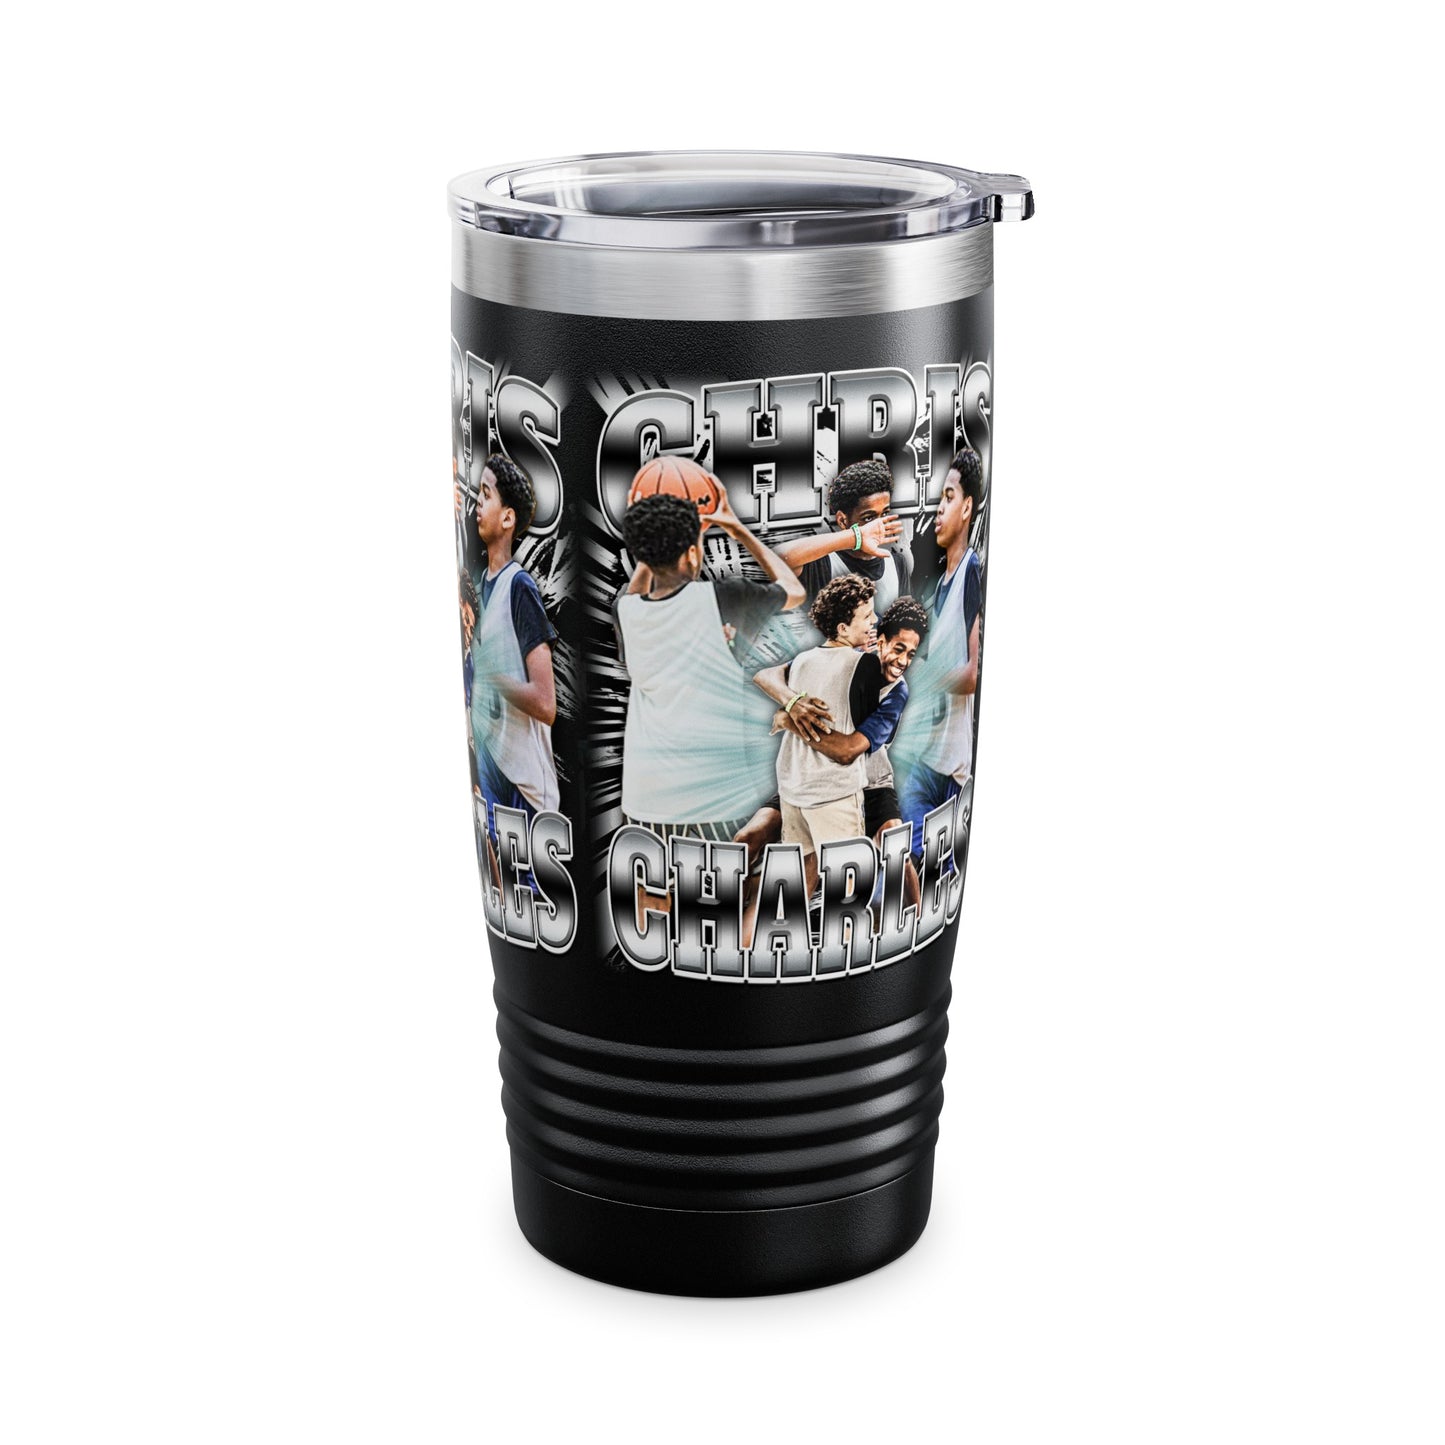 Chris Charles Stainless Steal Tumbler